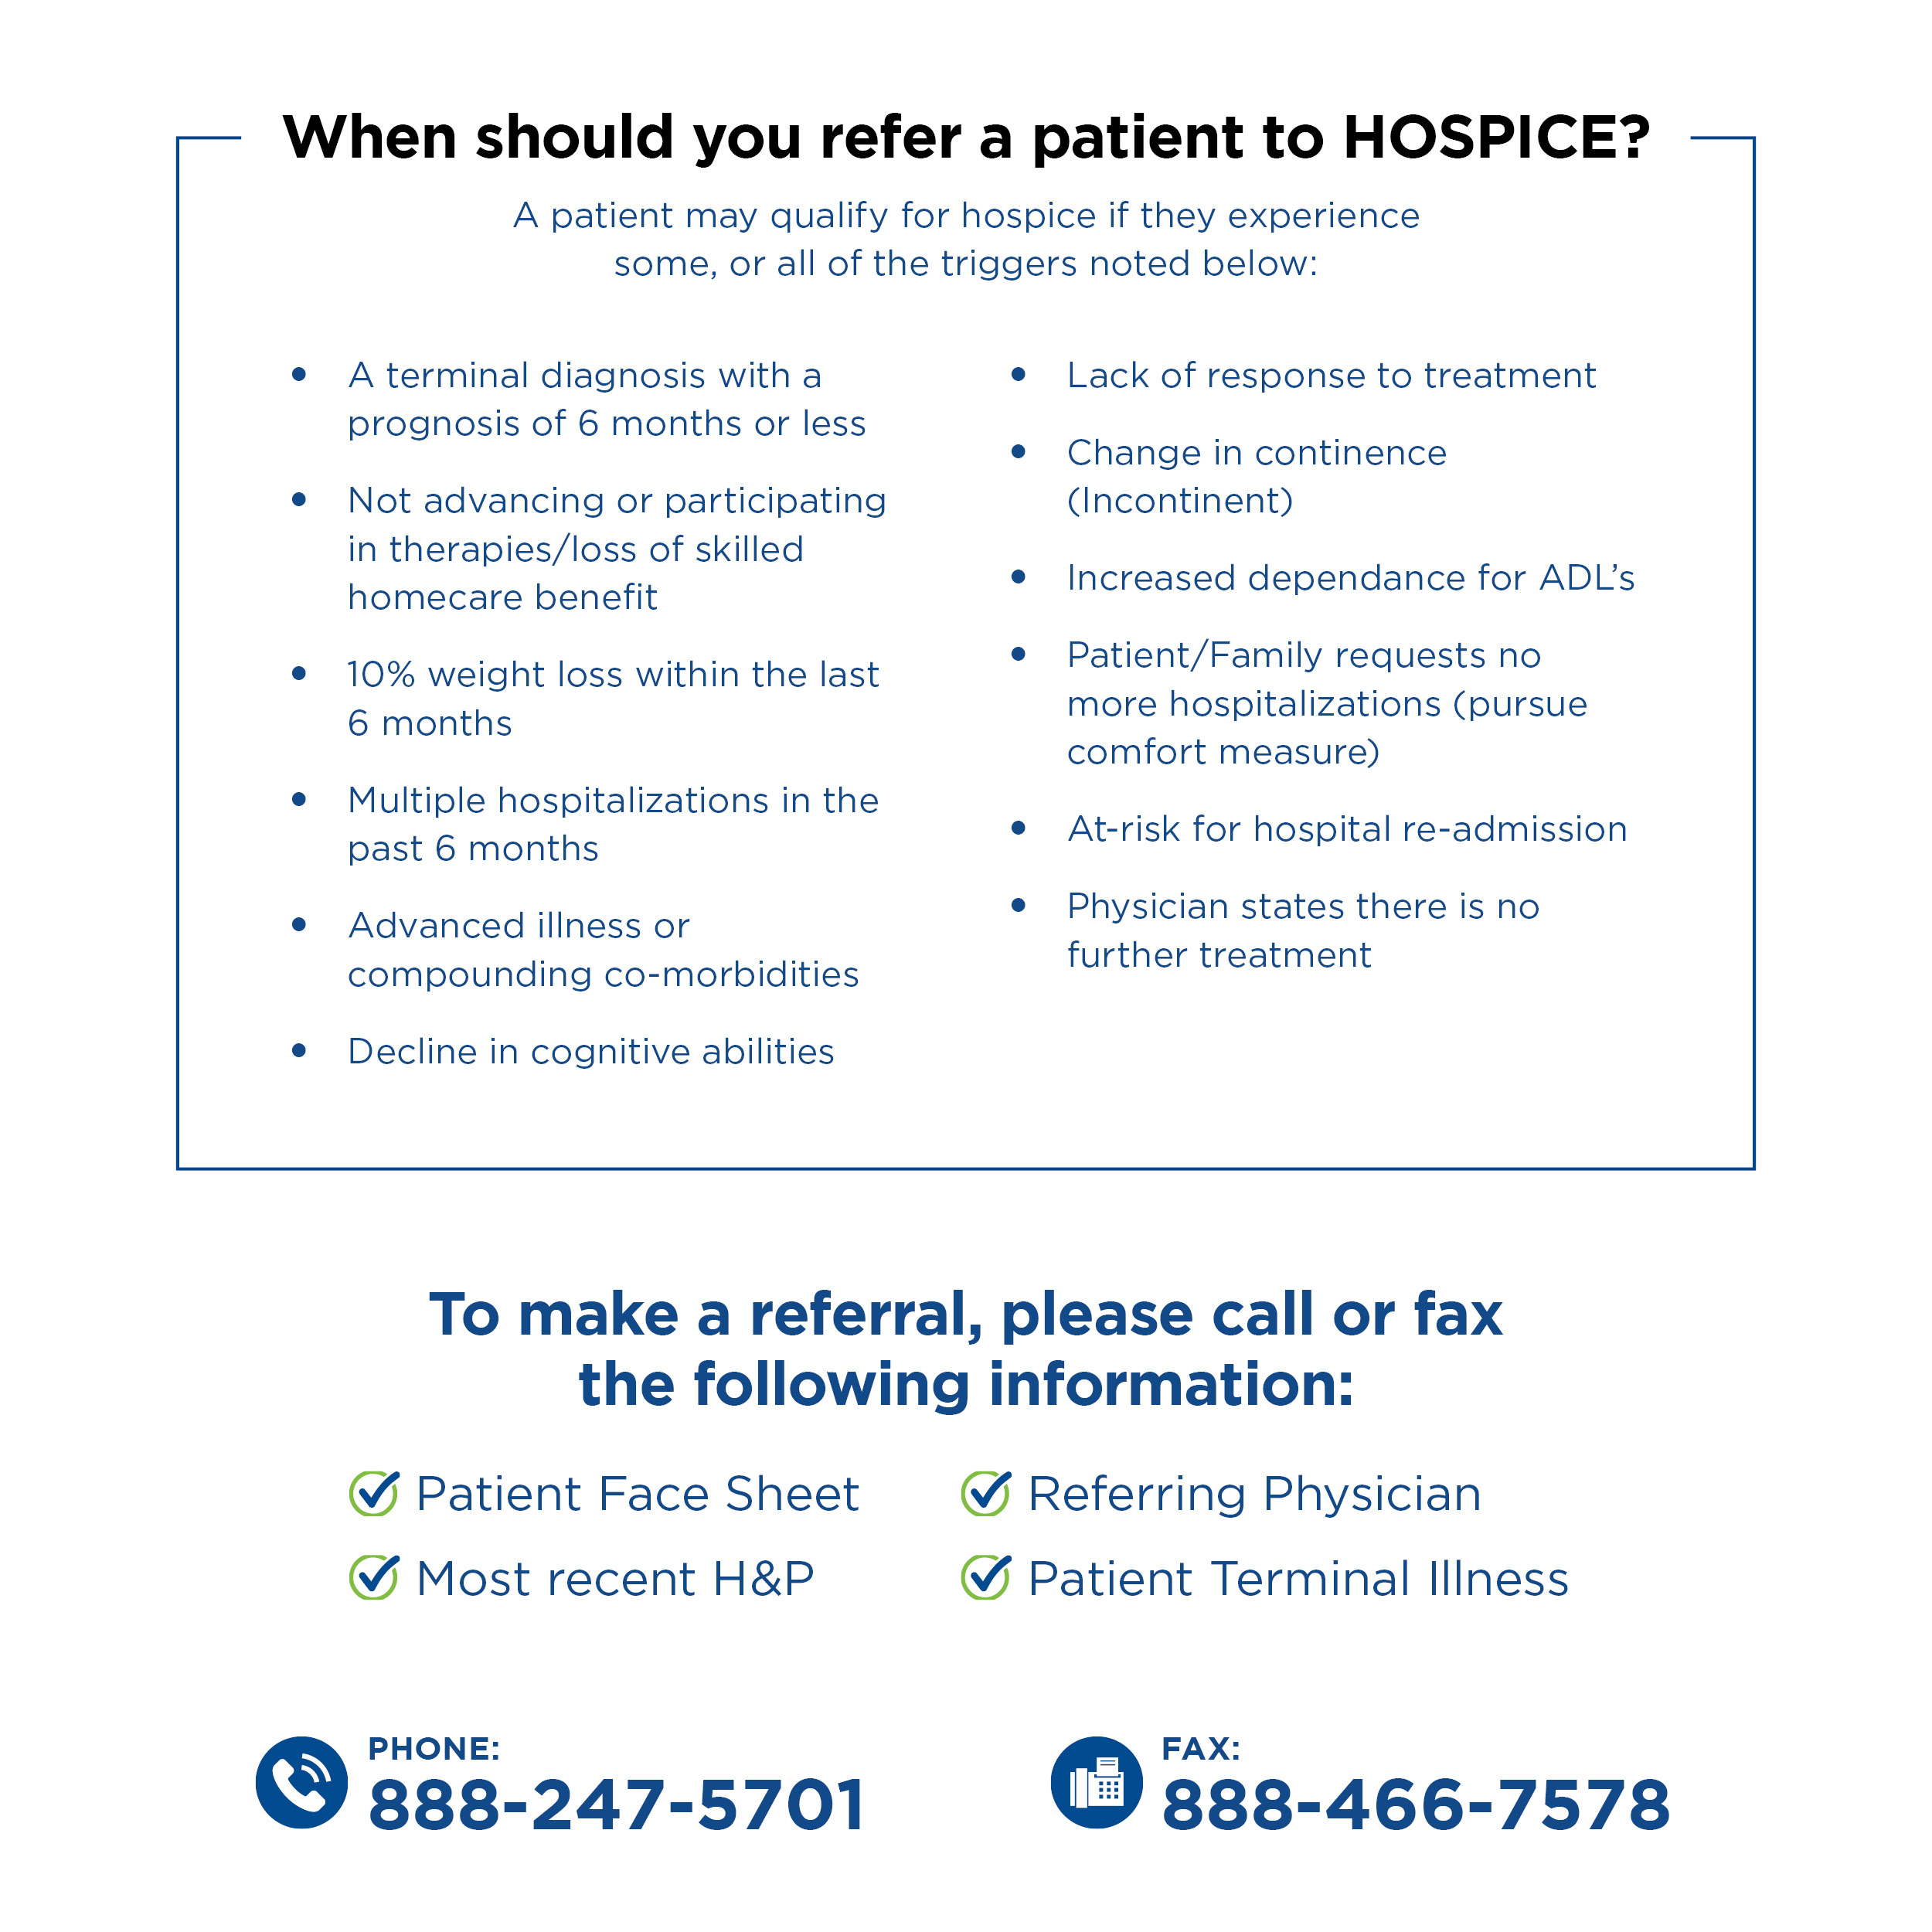 When should you refer a patient to HOSPICE?